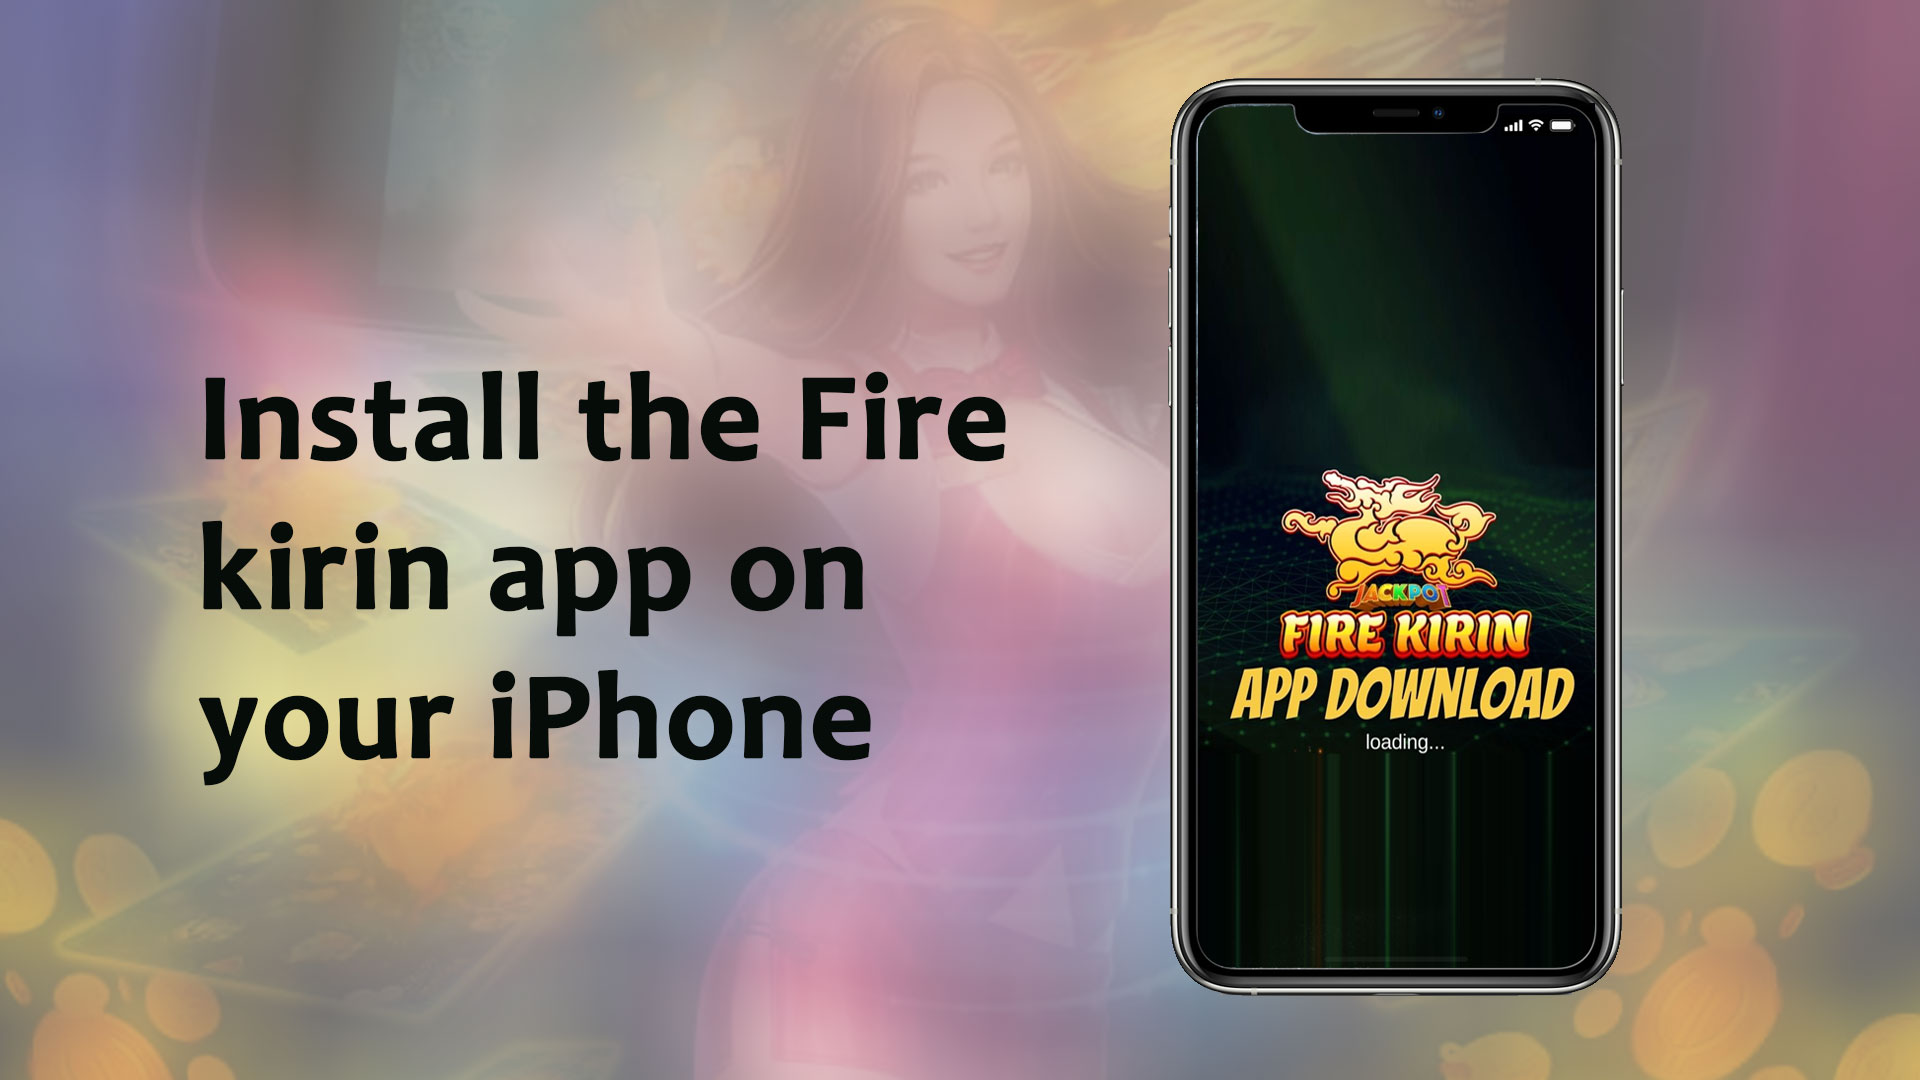 How to install the Fire kirin app for iPhone